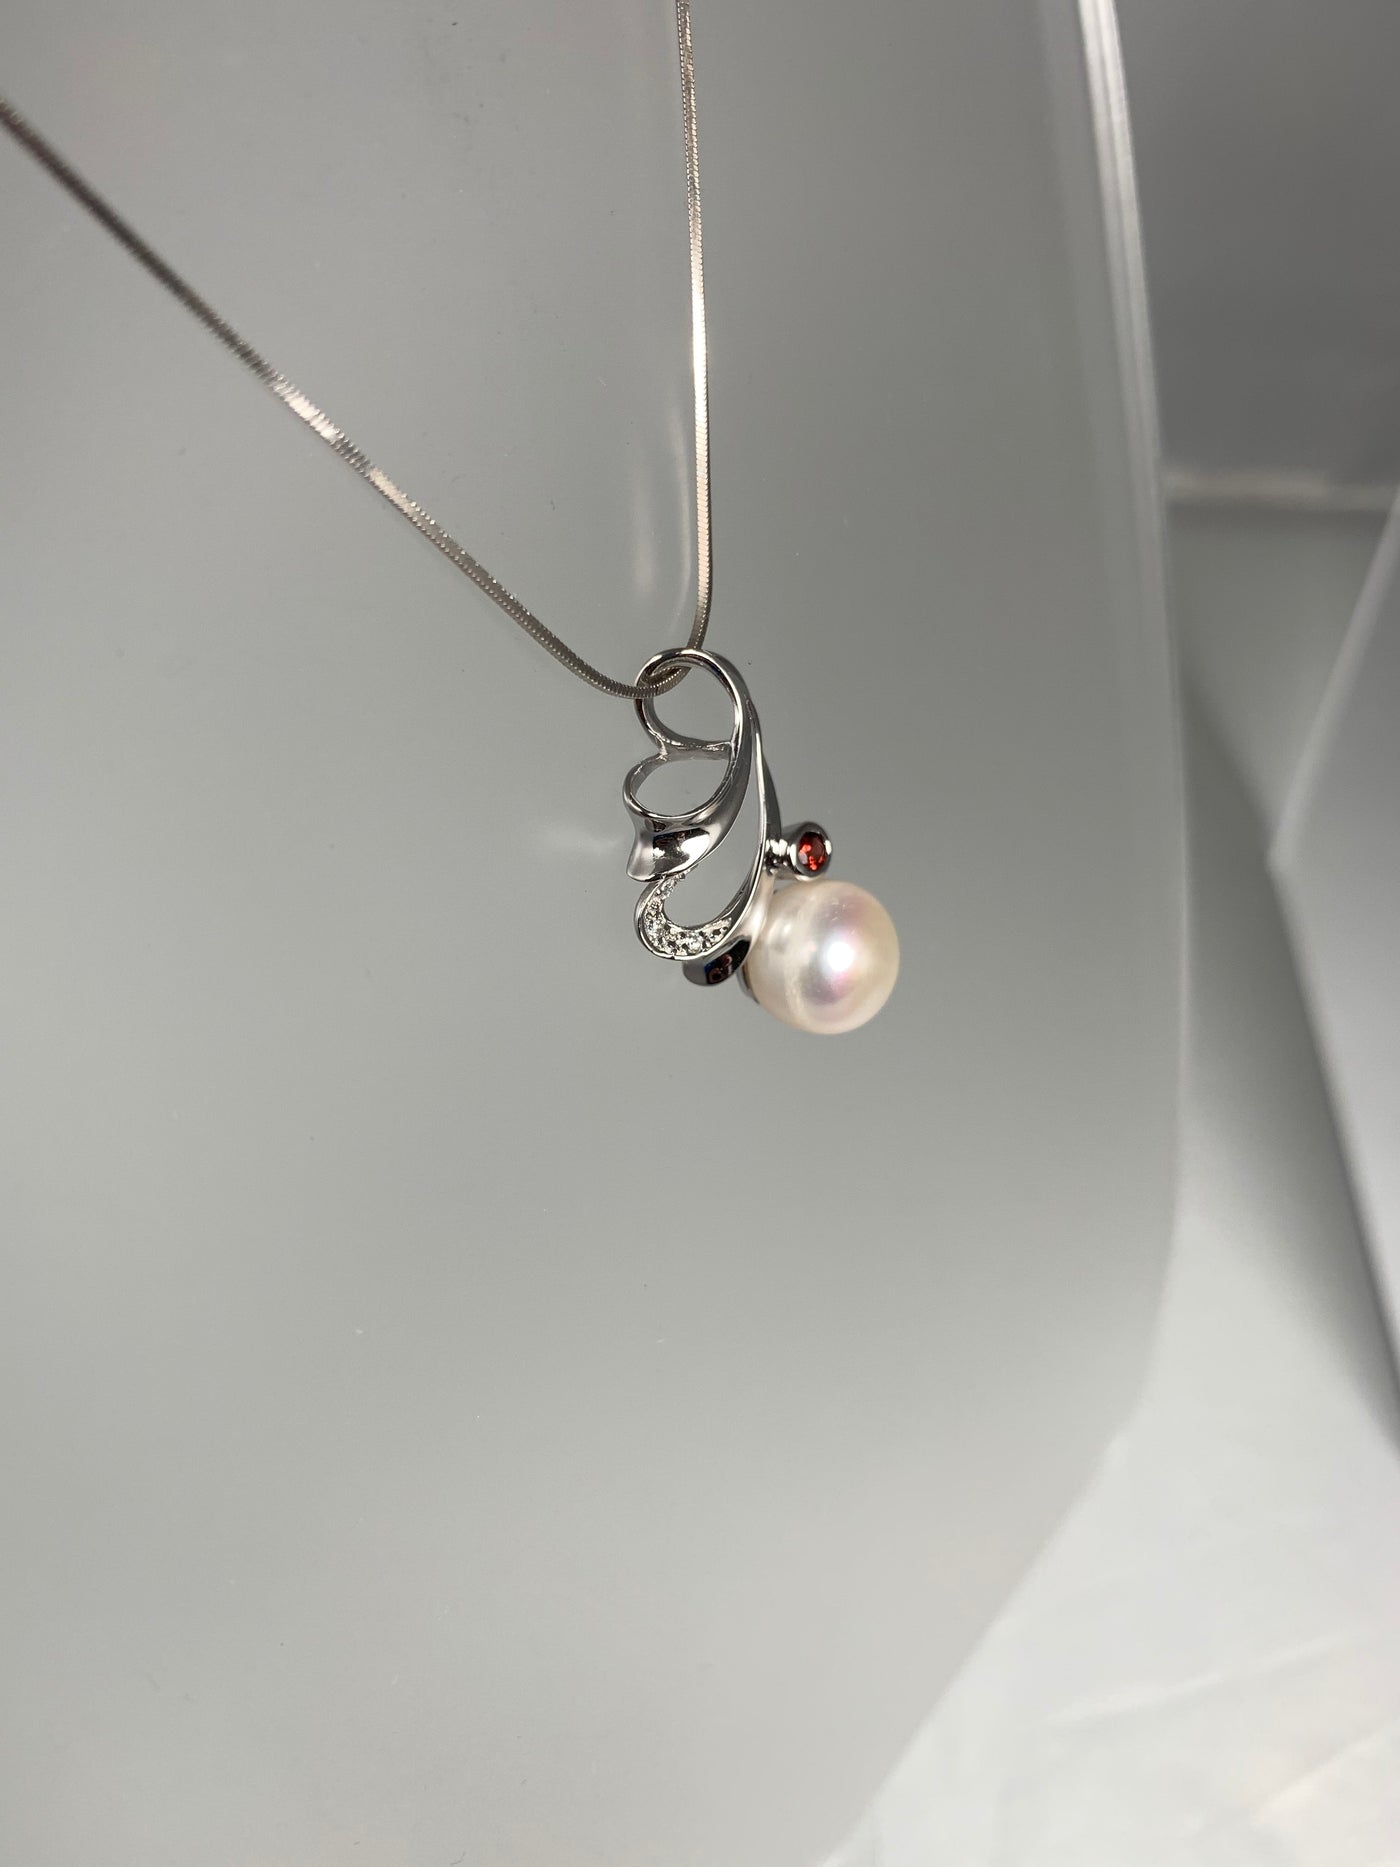 12mm Round Pearl with Garnet accent Pendant in Sterling Silver